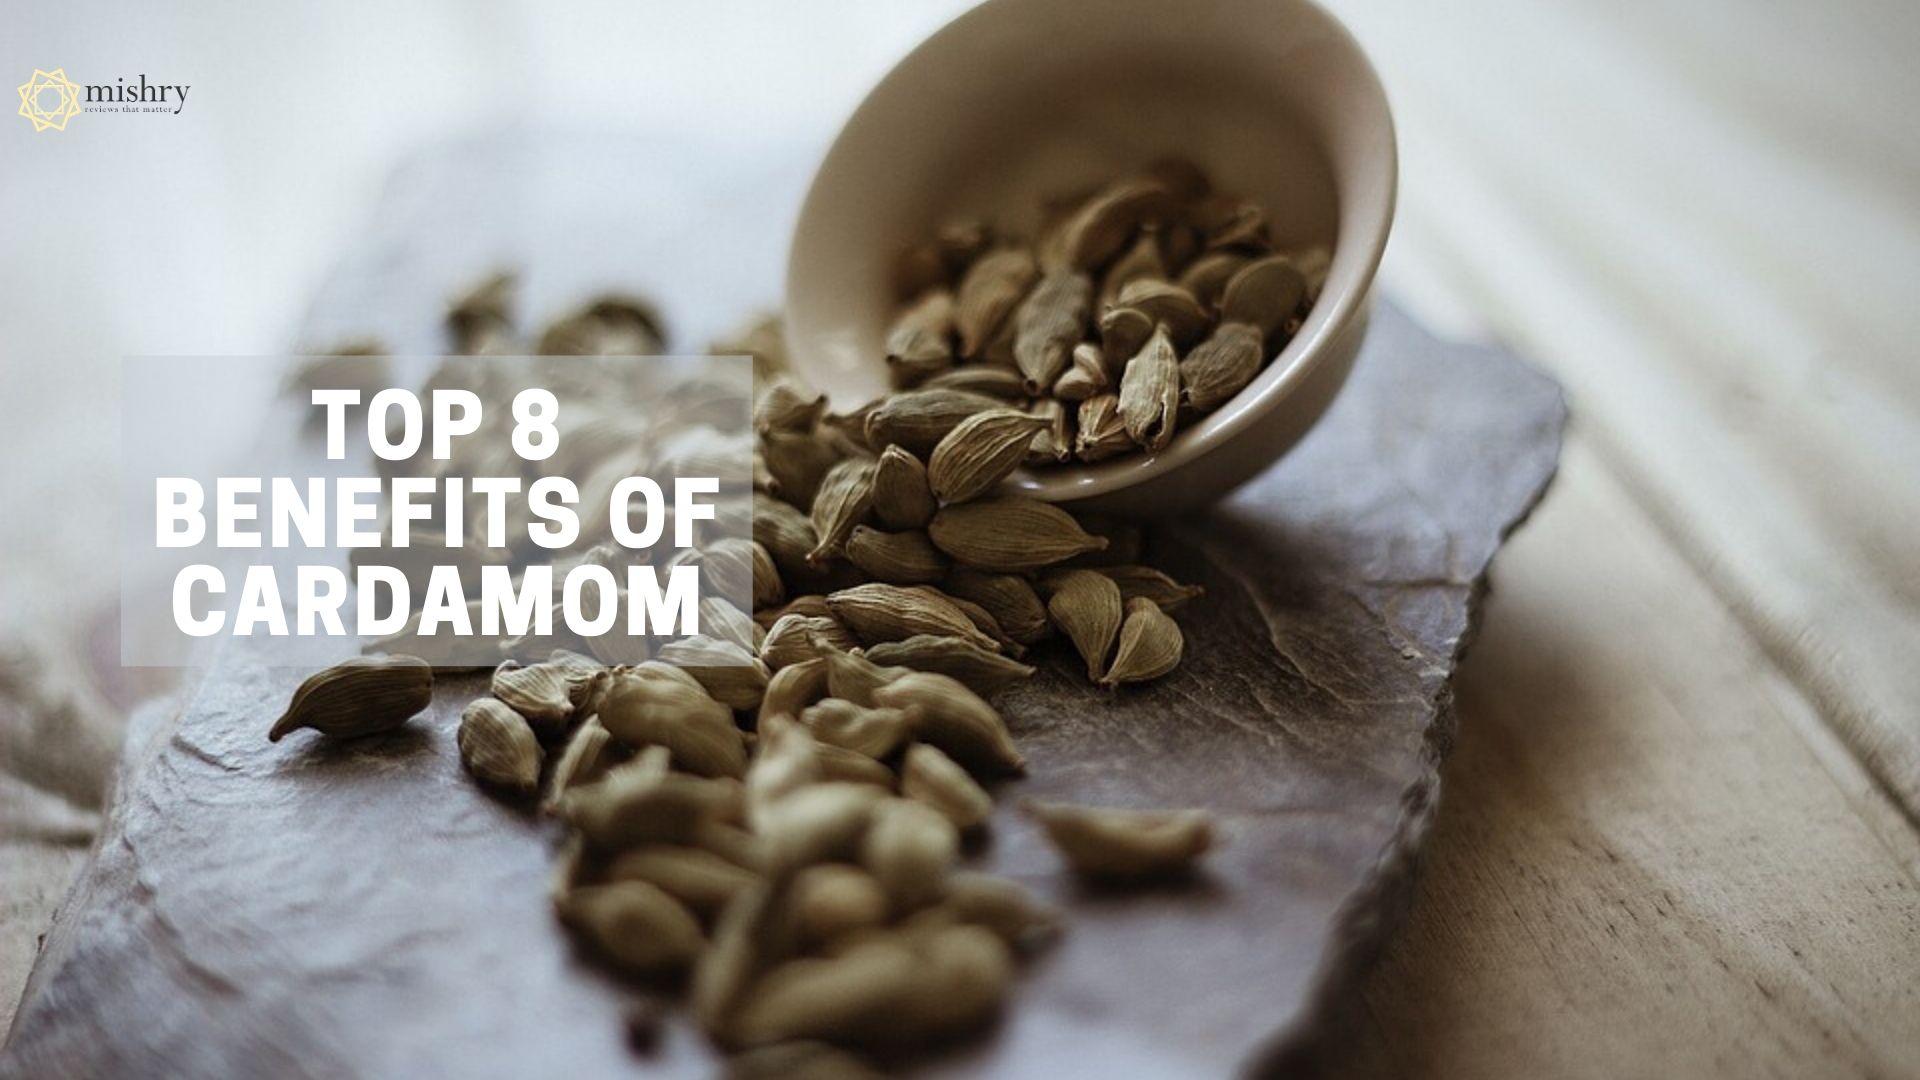 8 Benefits, Uses and Side Effects of Cardamom - Mishry